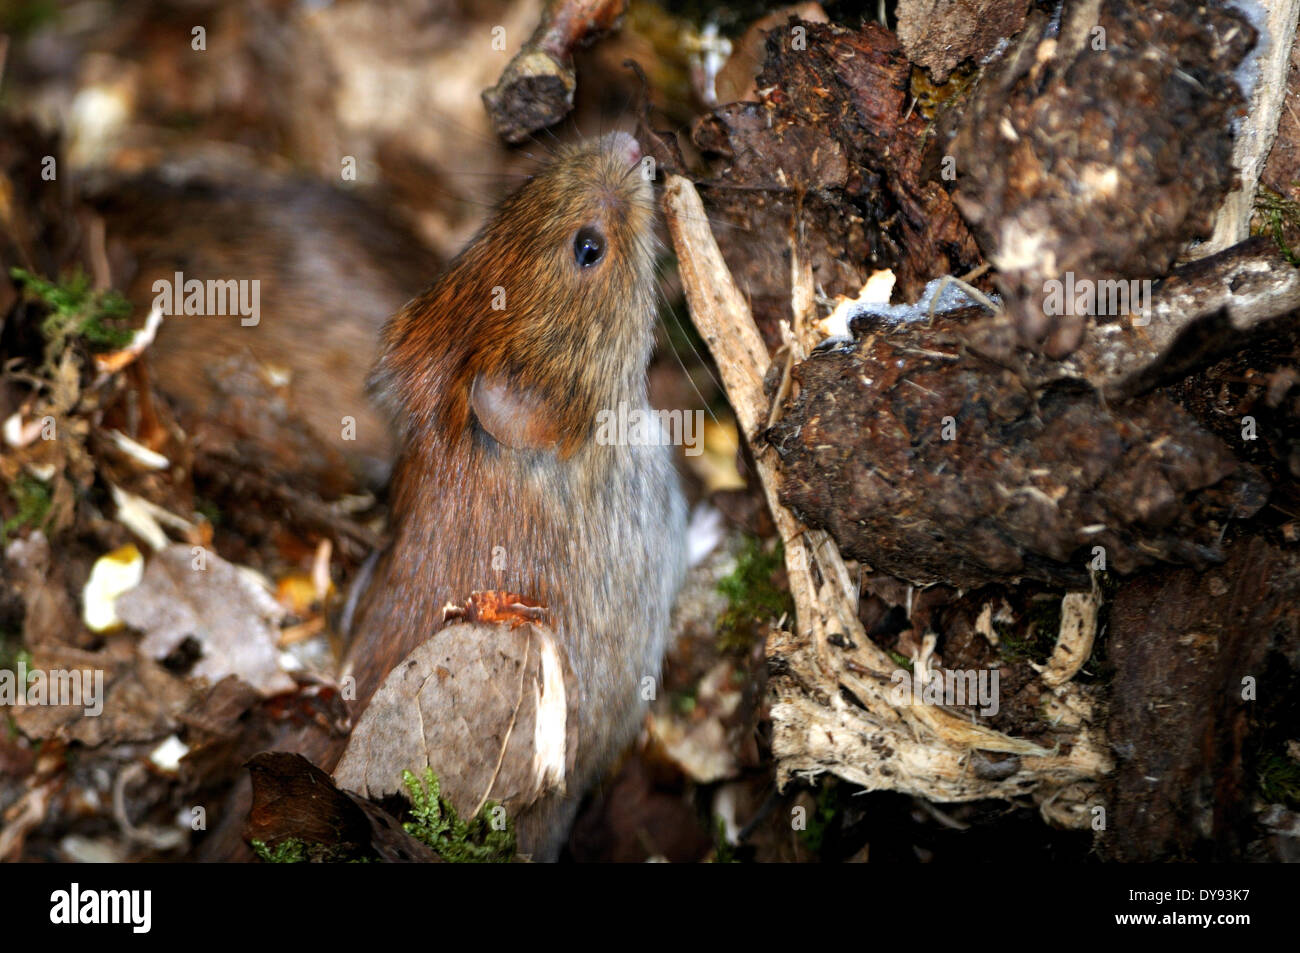 Mice mouse vole root vole voles bank vole Clethrionomys glareolus little rodents rodent forest ground Rodents animal animals, Stock Photo